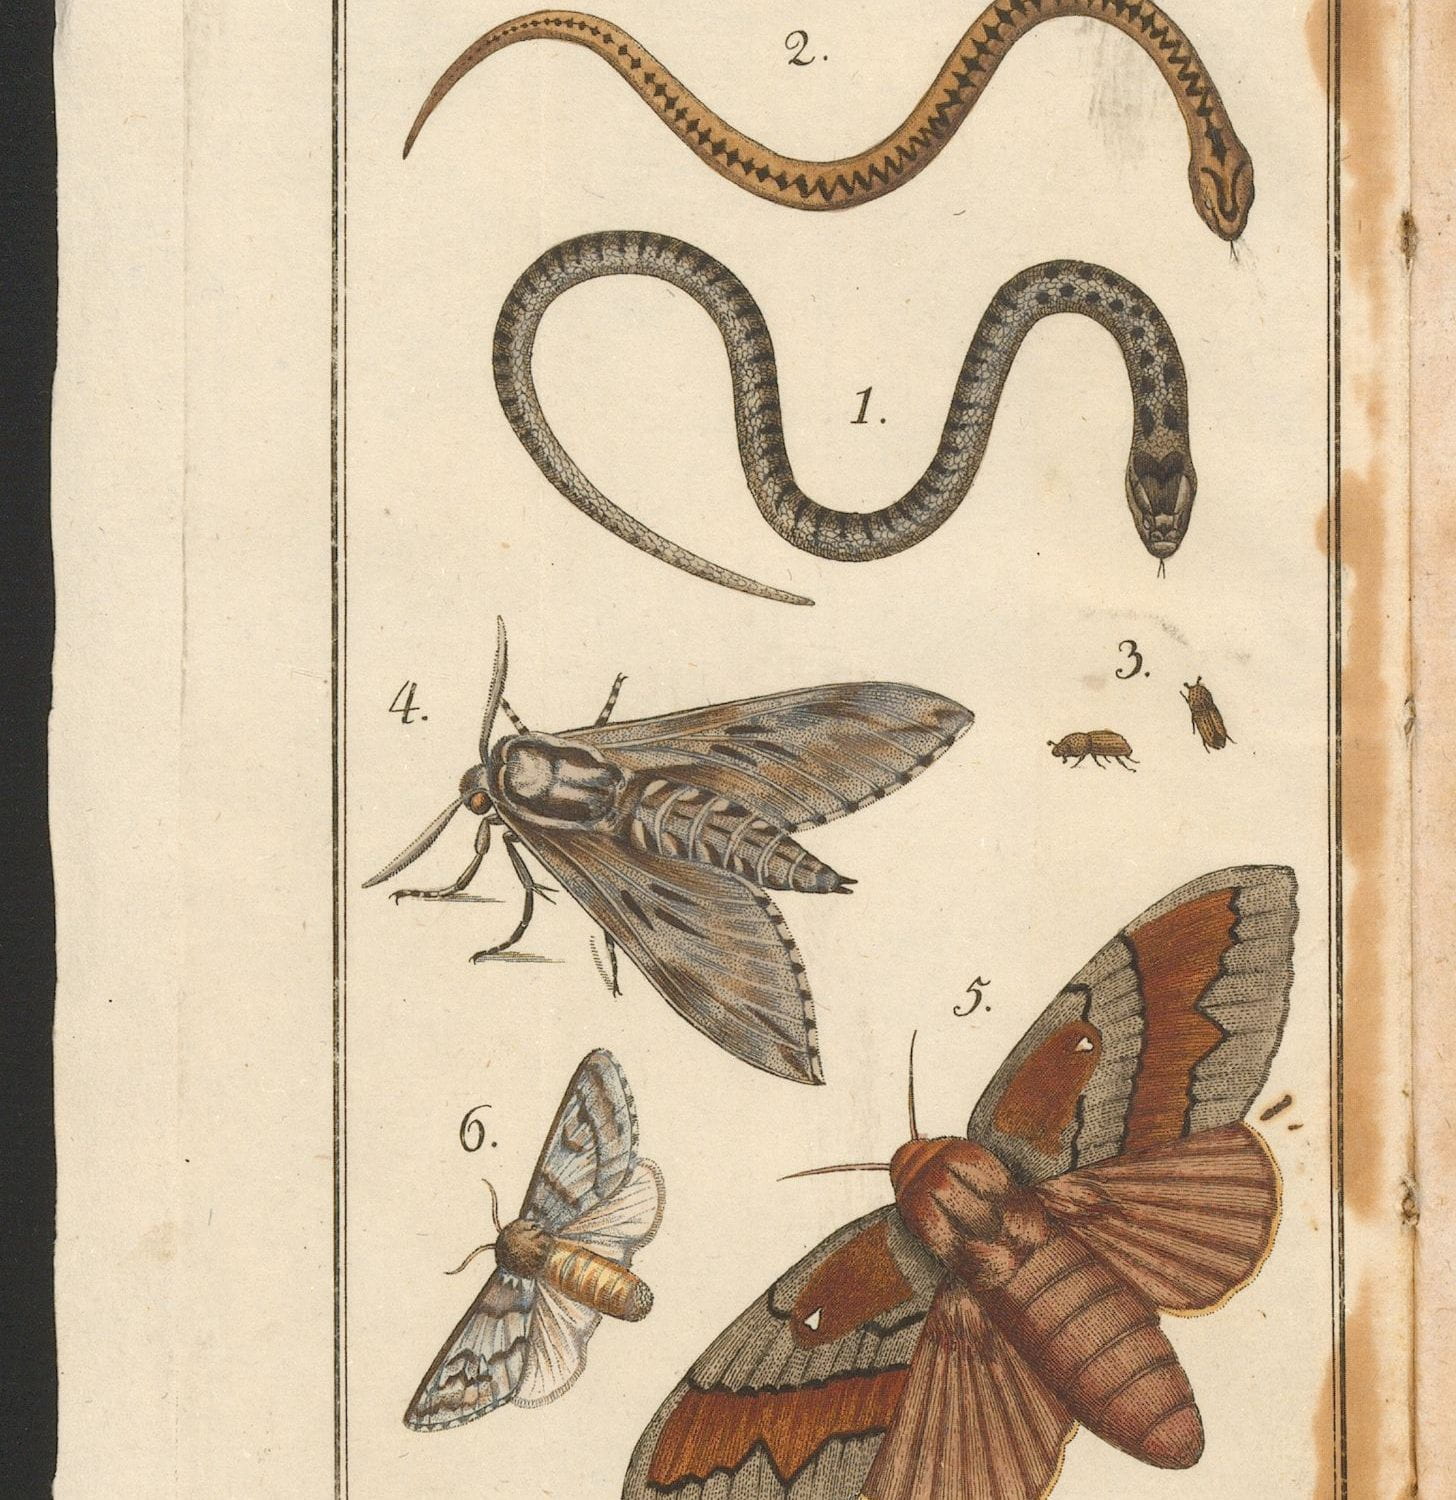 Illustrations of snakes and insects